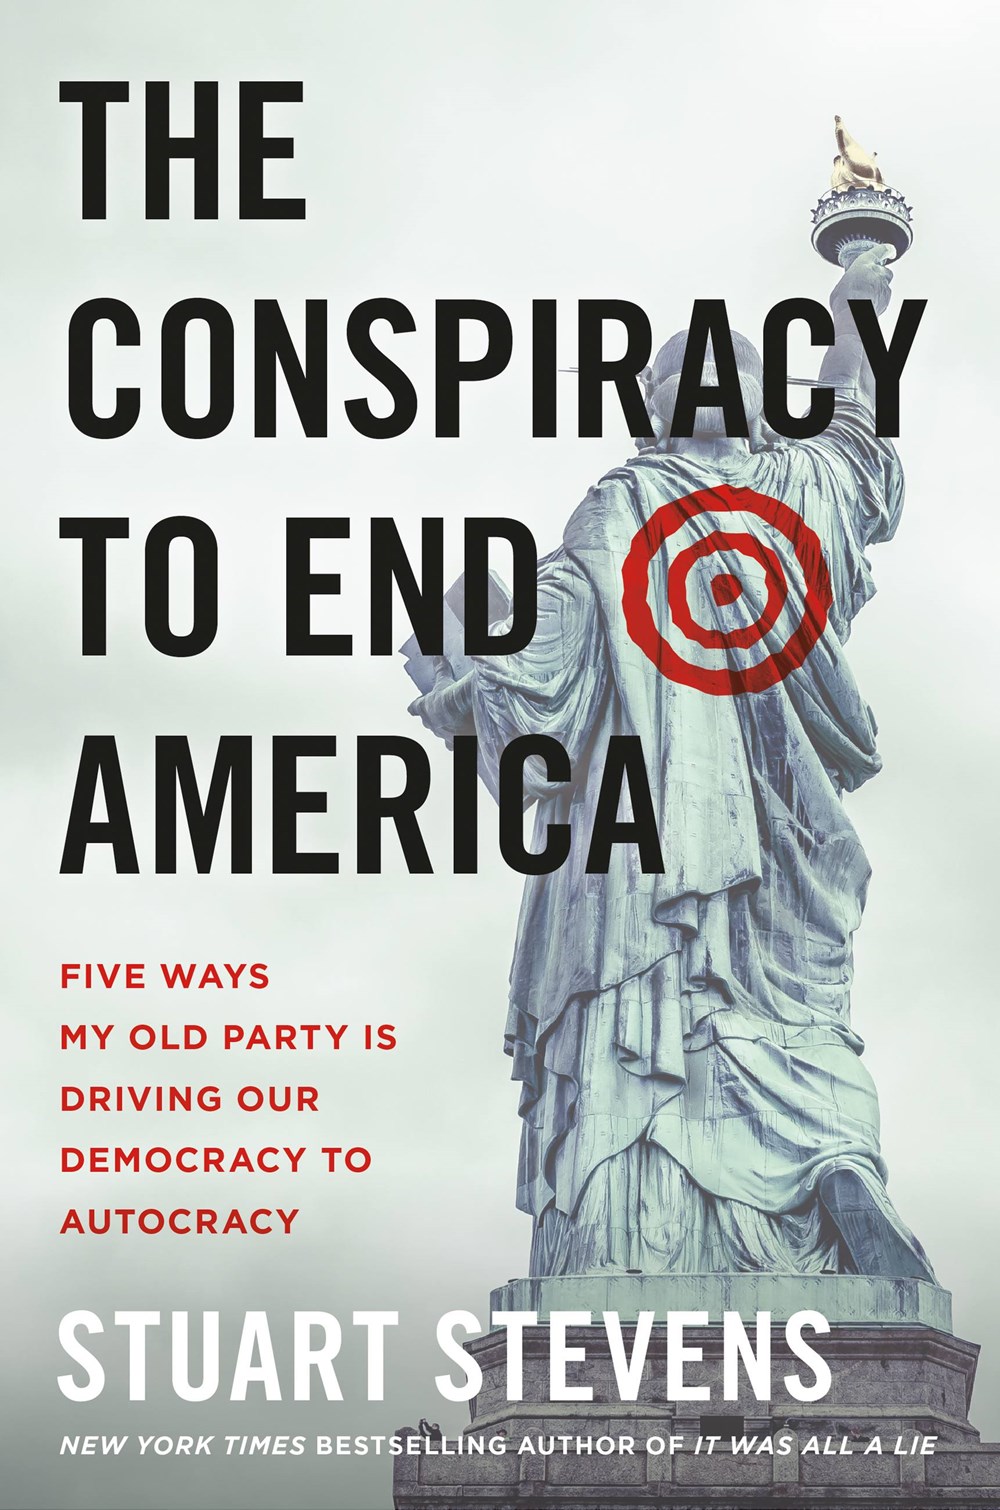 The Conspiracy To End America: Five Ways My Old Party Is Driving Our Democracy to Autocracy